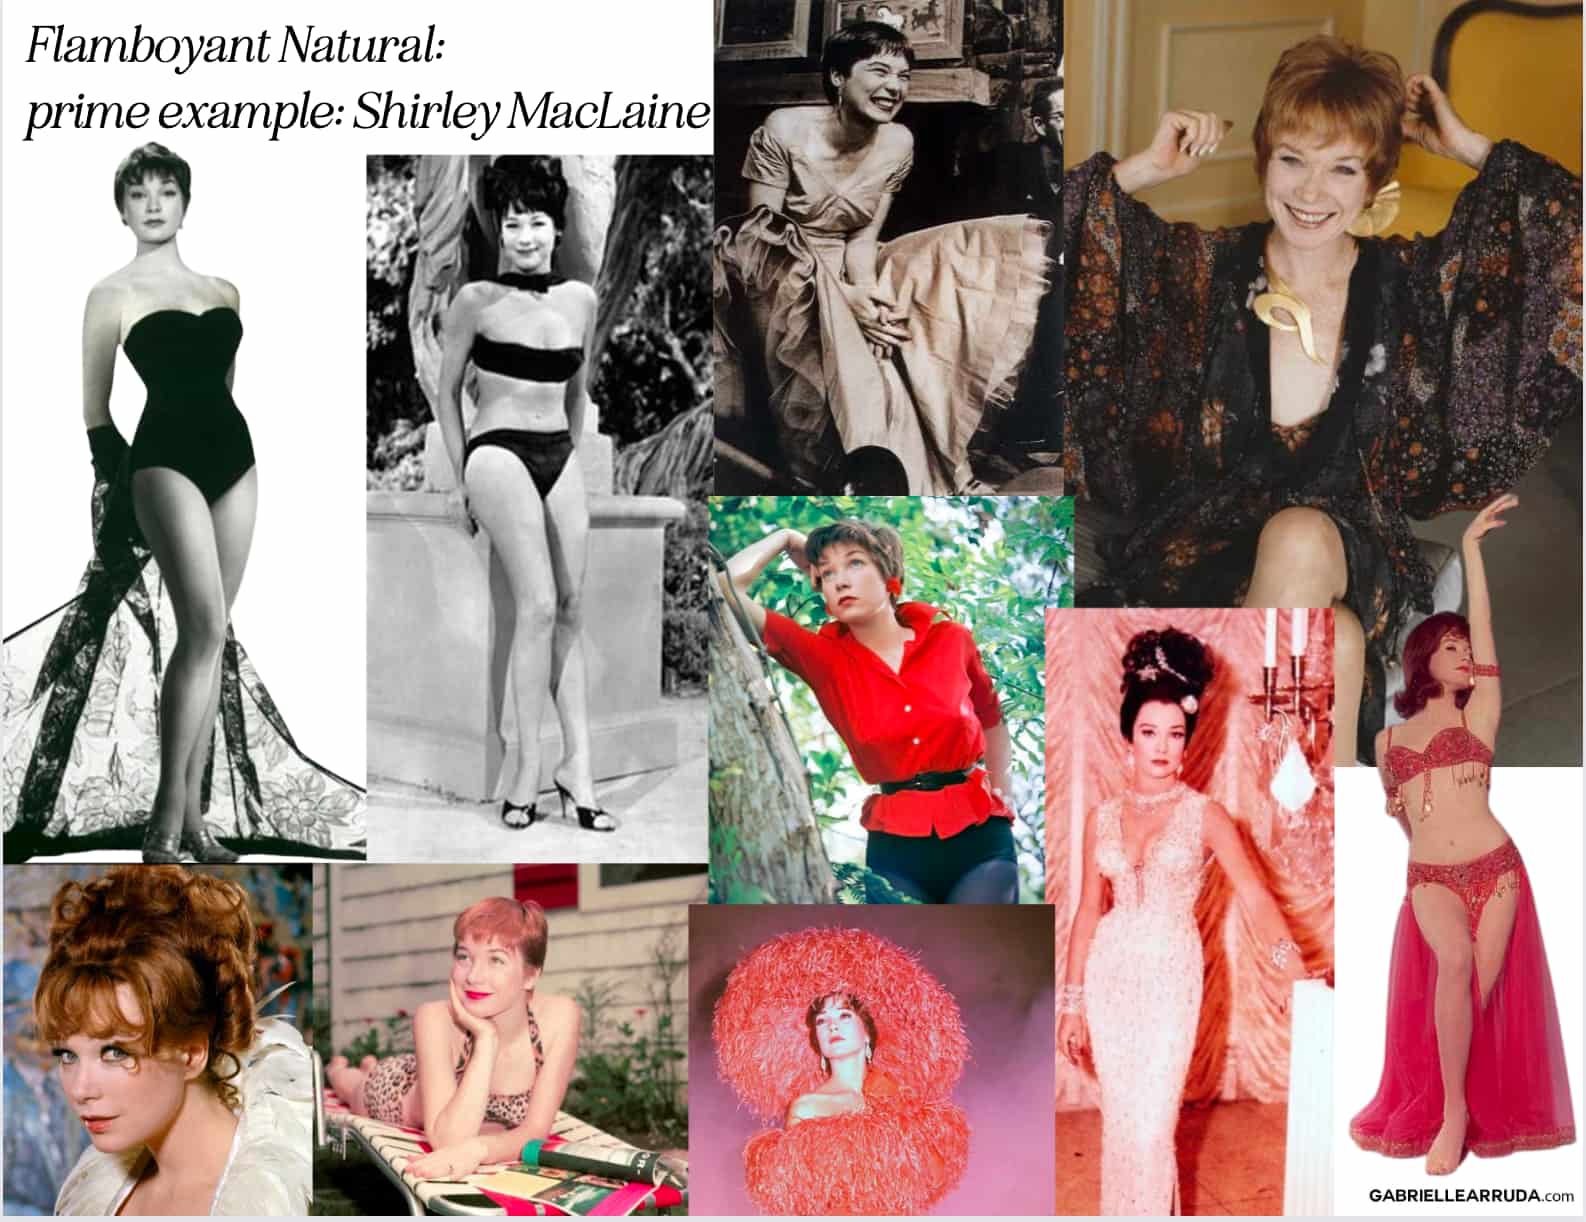 shirley maclaine prime fn example collage